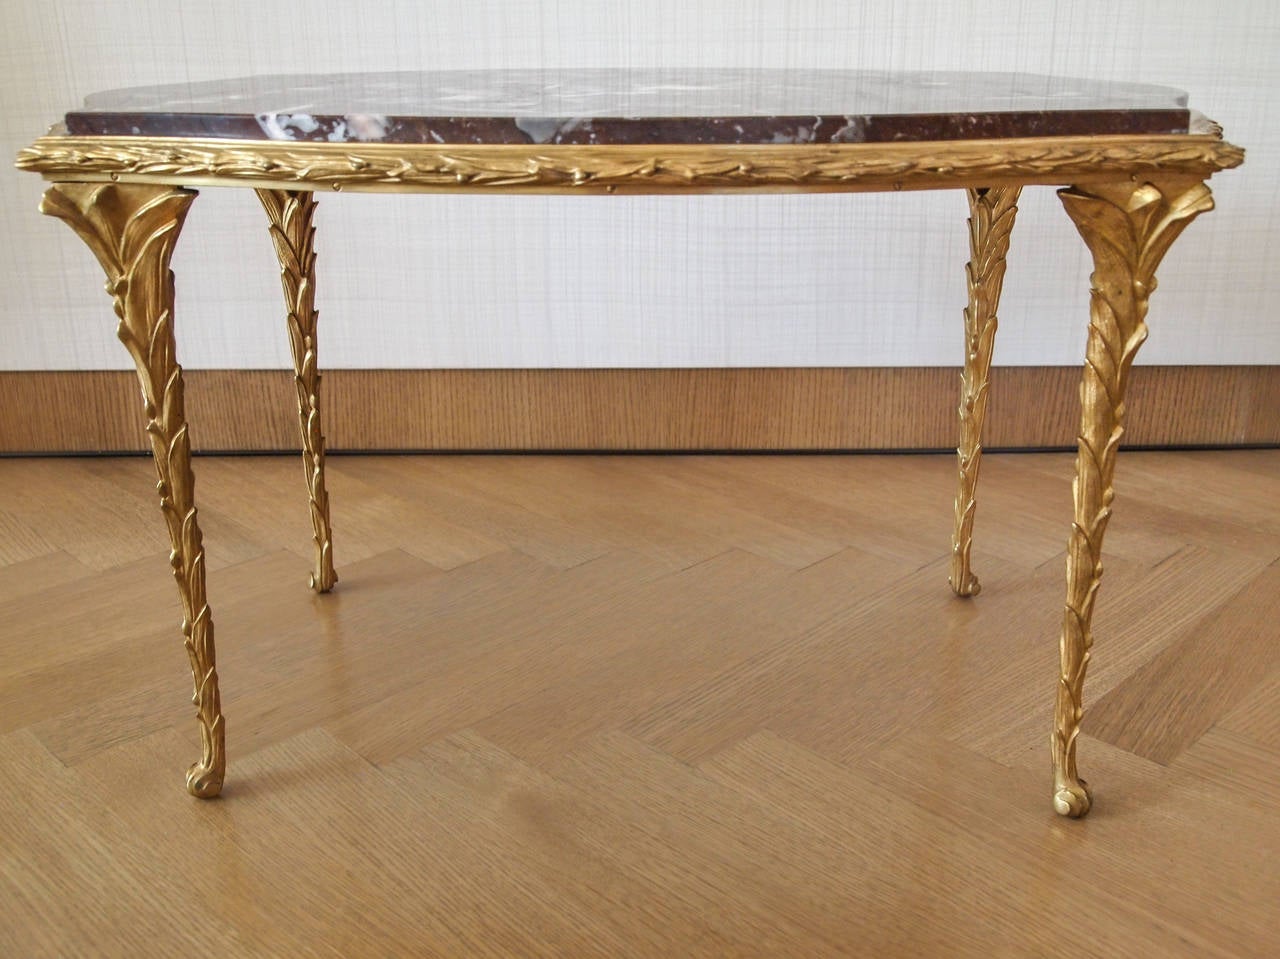 Beautiful gilt bronze side table with marble top by Maison Baguès. Fully decorated base with gilt foliate castings on almost every surface. Excellent condition with minor wear to gilding.